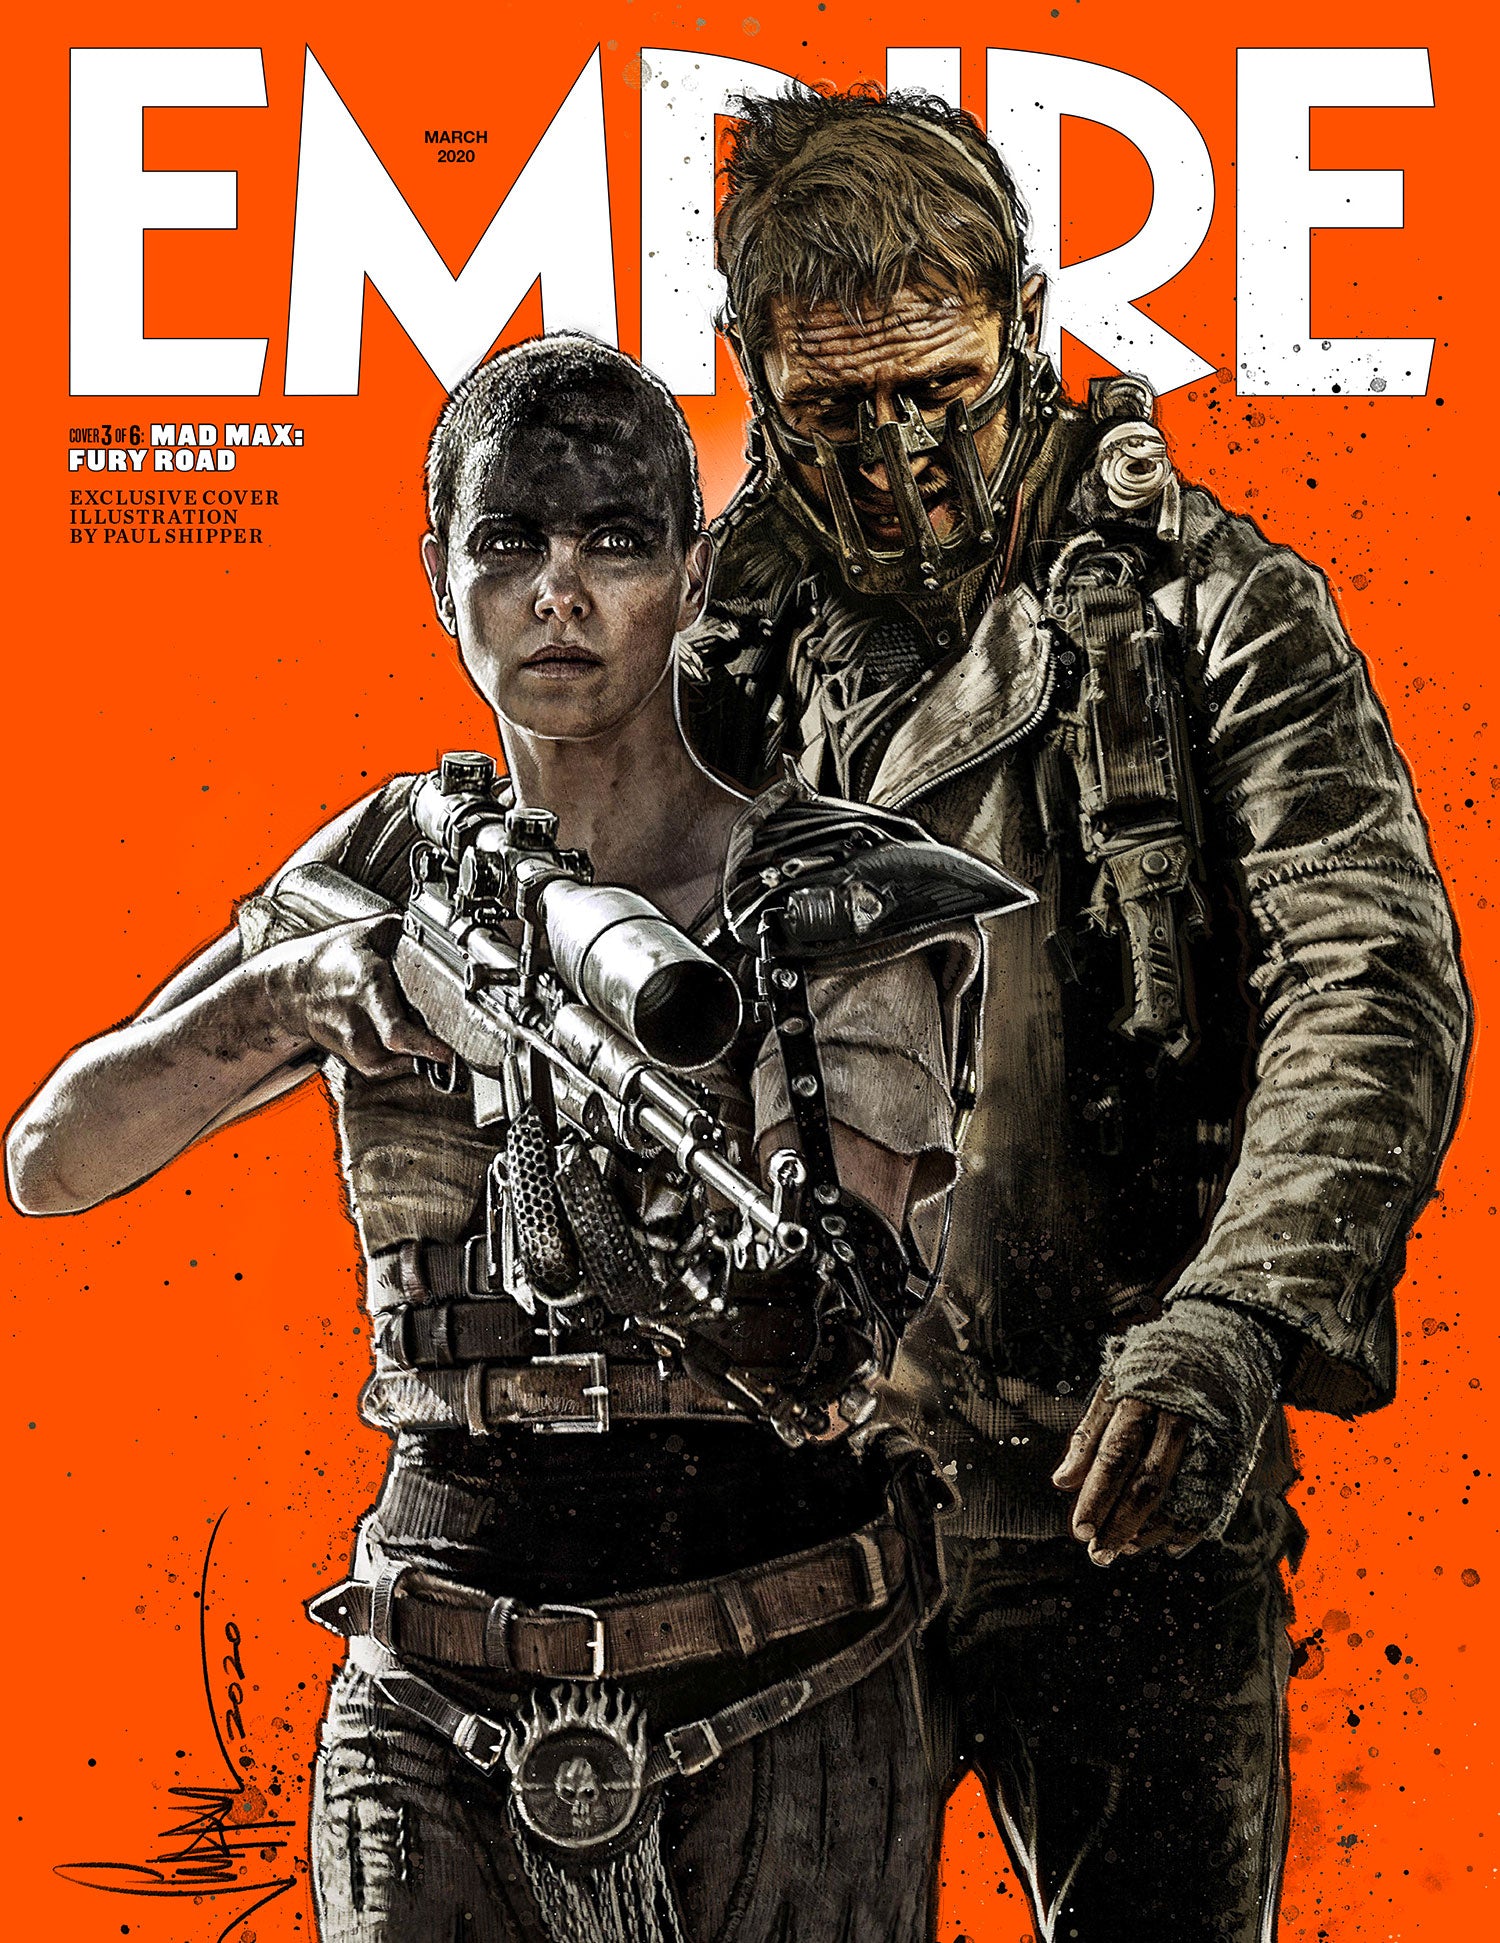 Empire Magazine March 2020: MAD MAX: FURY ROAD TOM HARDY COVER #3 -  YourCelebrityMagazines